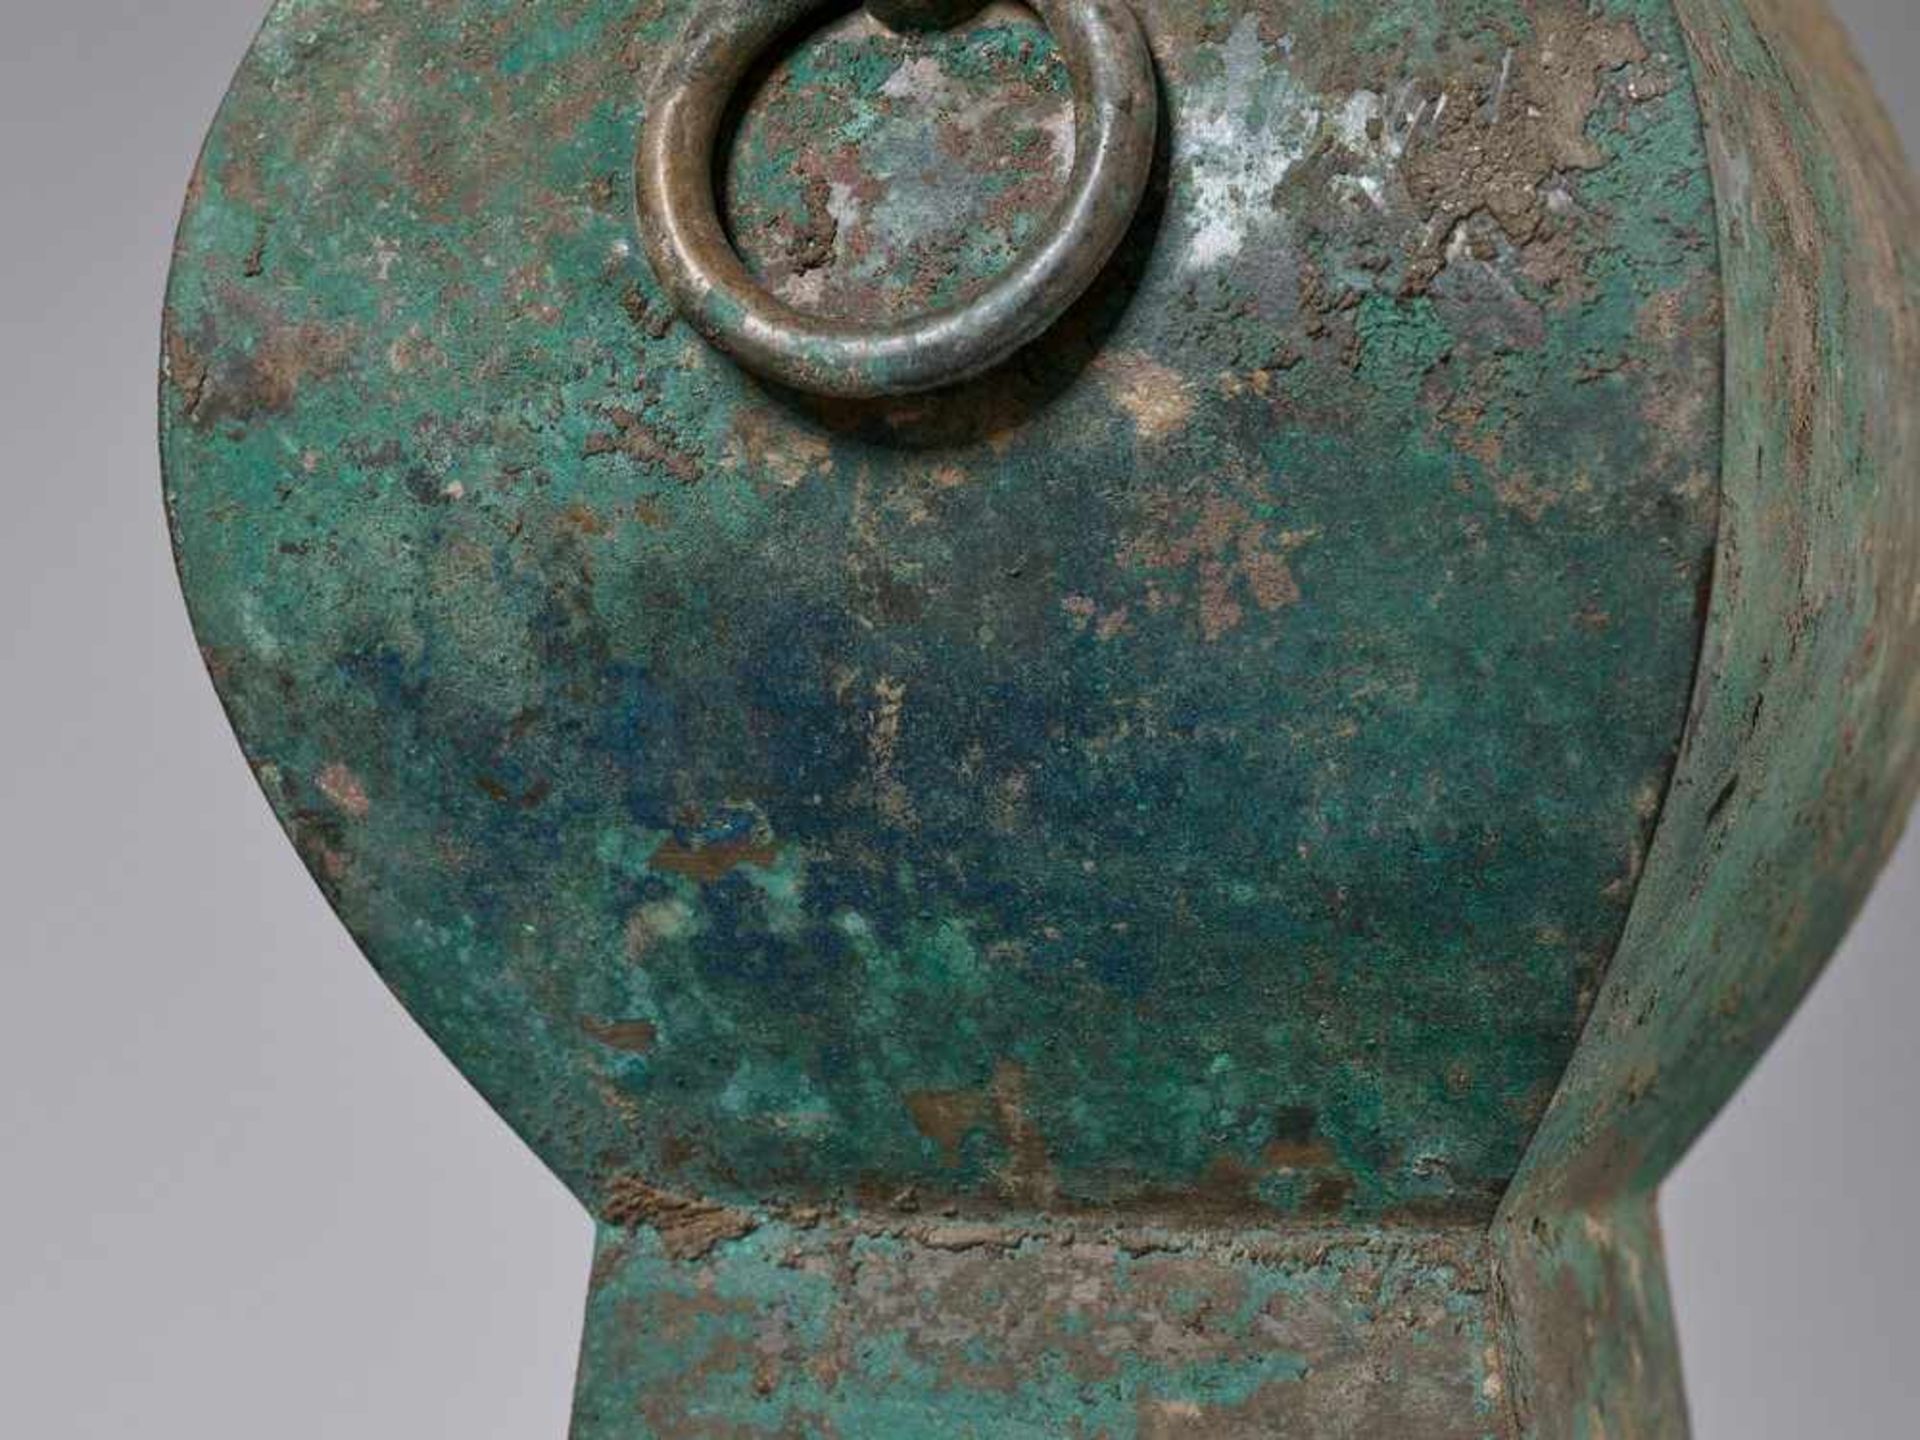 A FACETED BRONZE STORAGE VESSEL, FANGHU, HAN DYNASTY China, 206 BC-AD 220. The faceted pear-shaped - Image 2 of 20